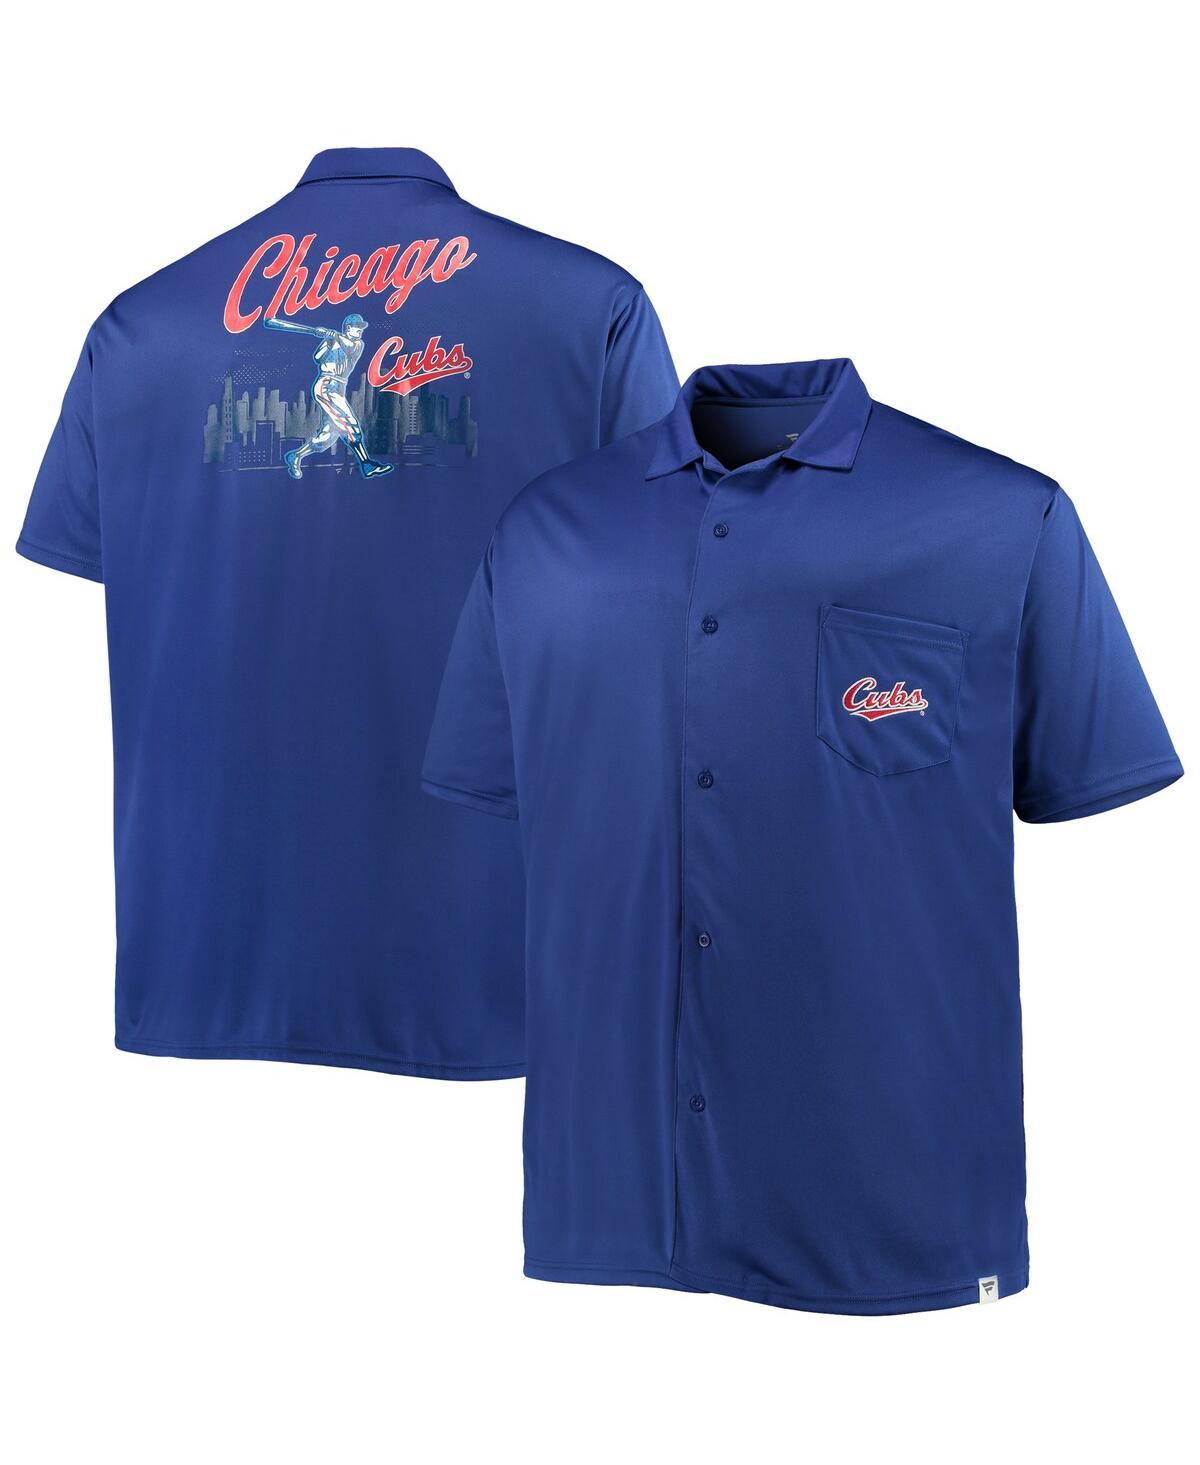 PROFILE MEN'S ROYAL CHICAGO CUBS BIG AND TALL BUTTON-UP SHIRT